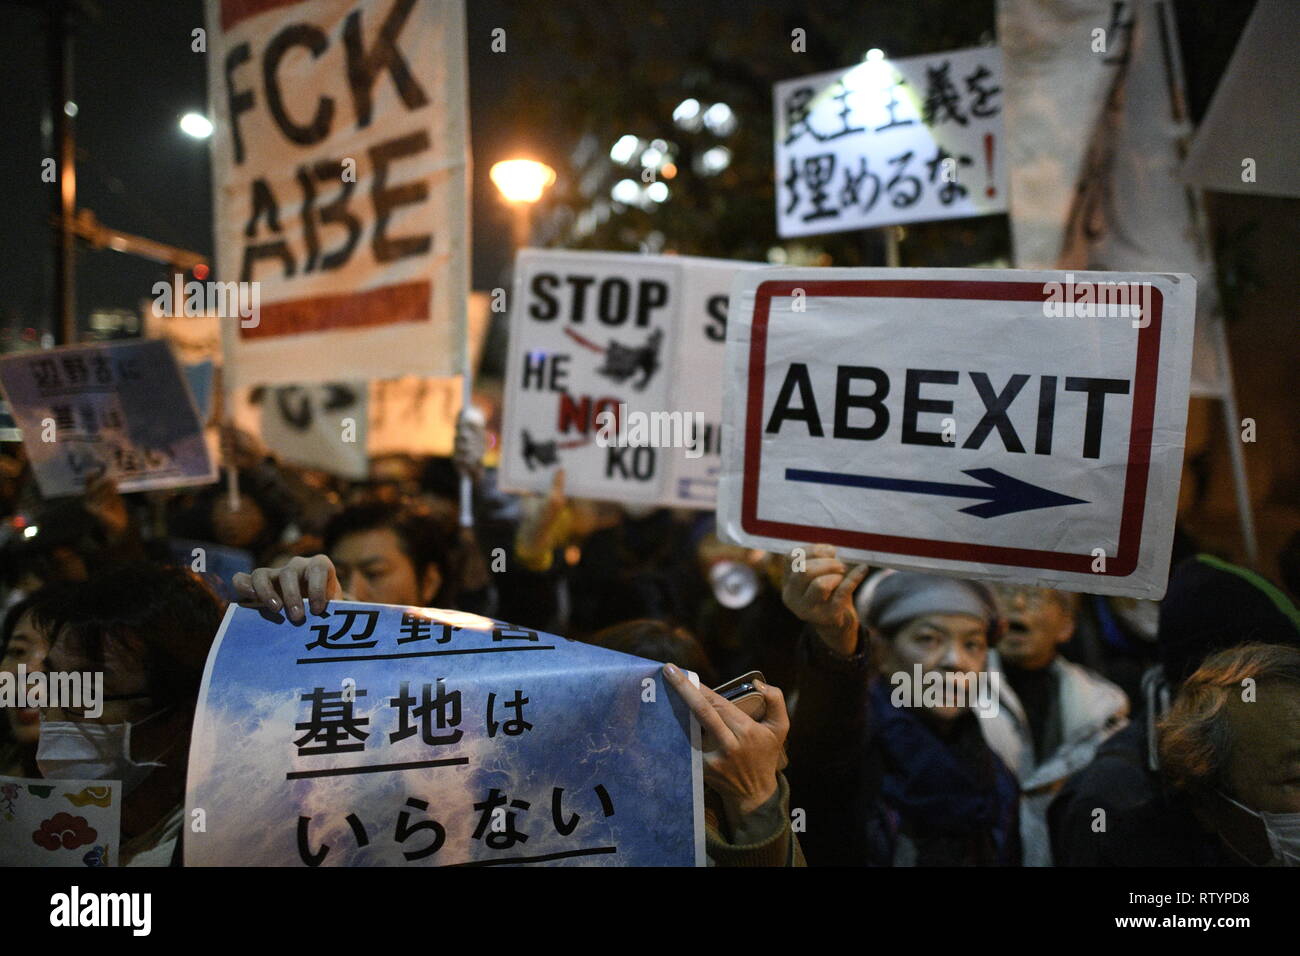 TOKYO, JAPAN - MARCH 1: Protesters stage a demonstration in front of Prime Ministers residence to protest against the U.S base in Japan on March 1, 2019 in Tokyo, Japan. The protests are part of wider demonstrations on the island against the government on-going relocation of the US Marine Corps Air Station Futenma to the Henoko district of Nago, Okinawa Prefecture. The residents of Japan's southwestern island region of Okinawa rejected a relocation plan for a U.S. military base in the Feb. 24 referendum, increasing pressure on the national government to change its stance that the facility will Stock Photo